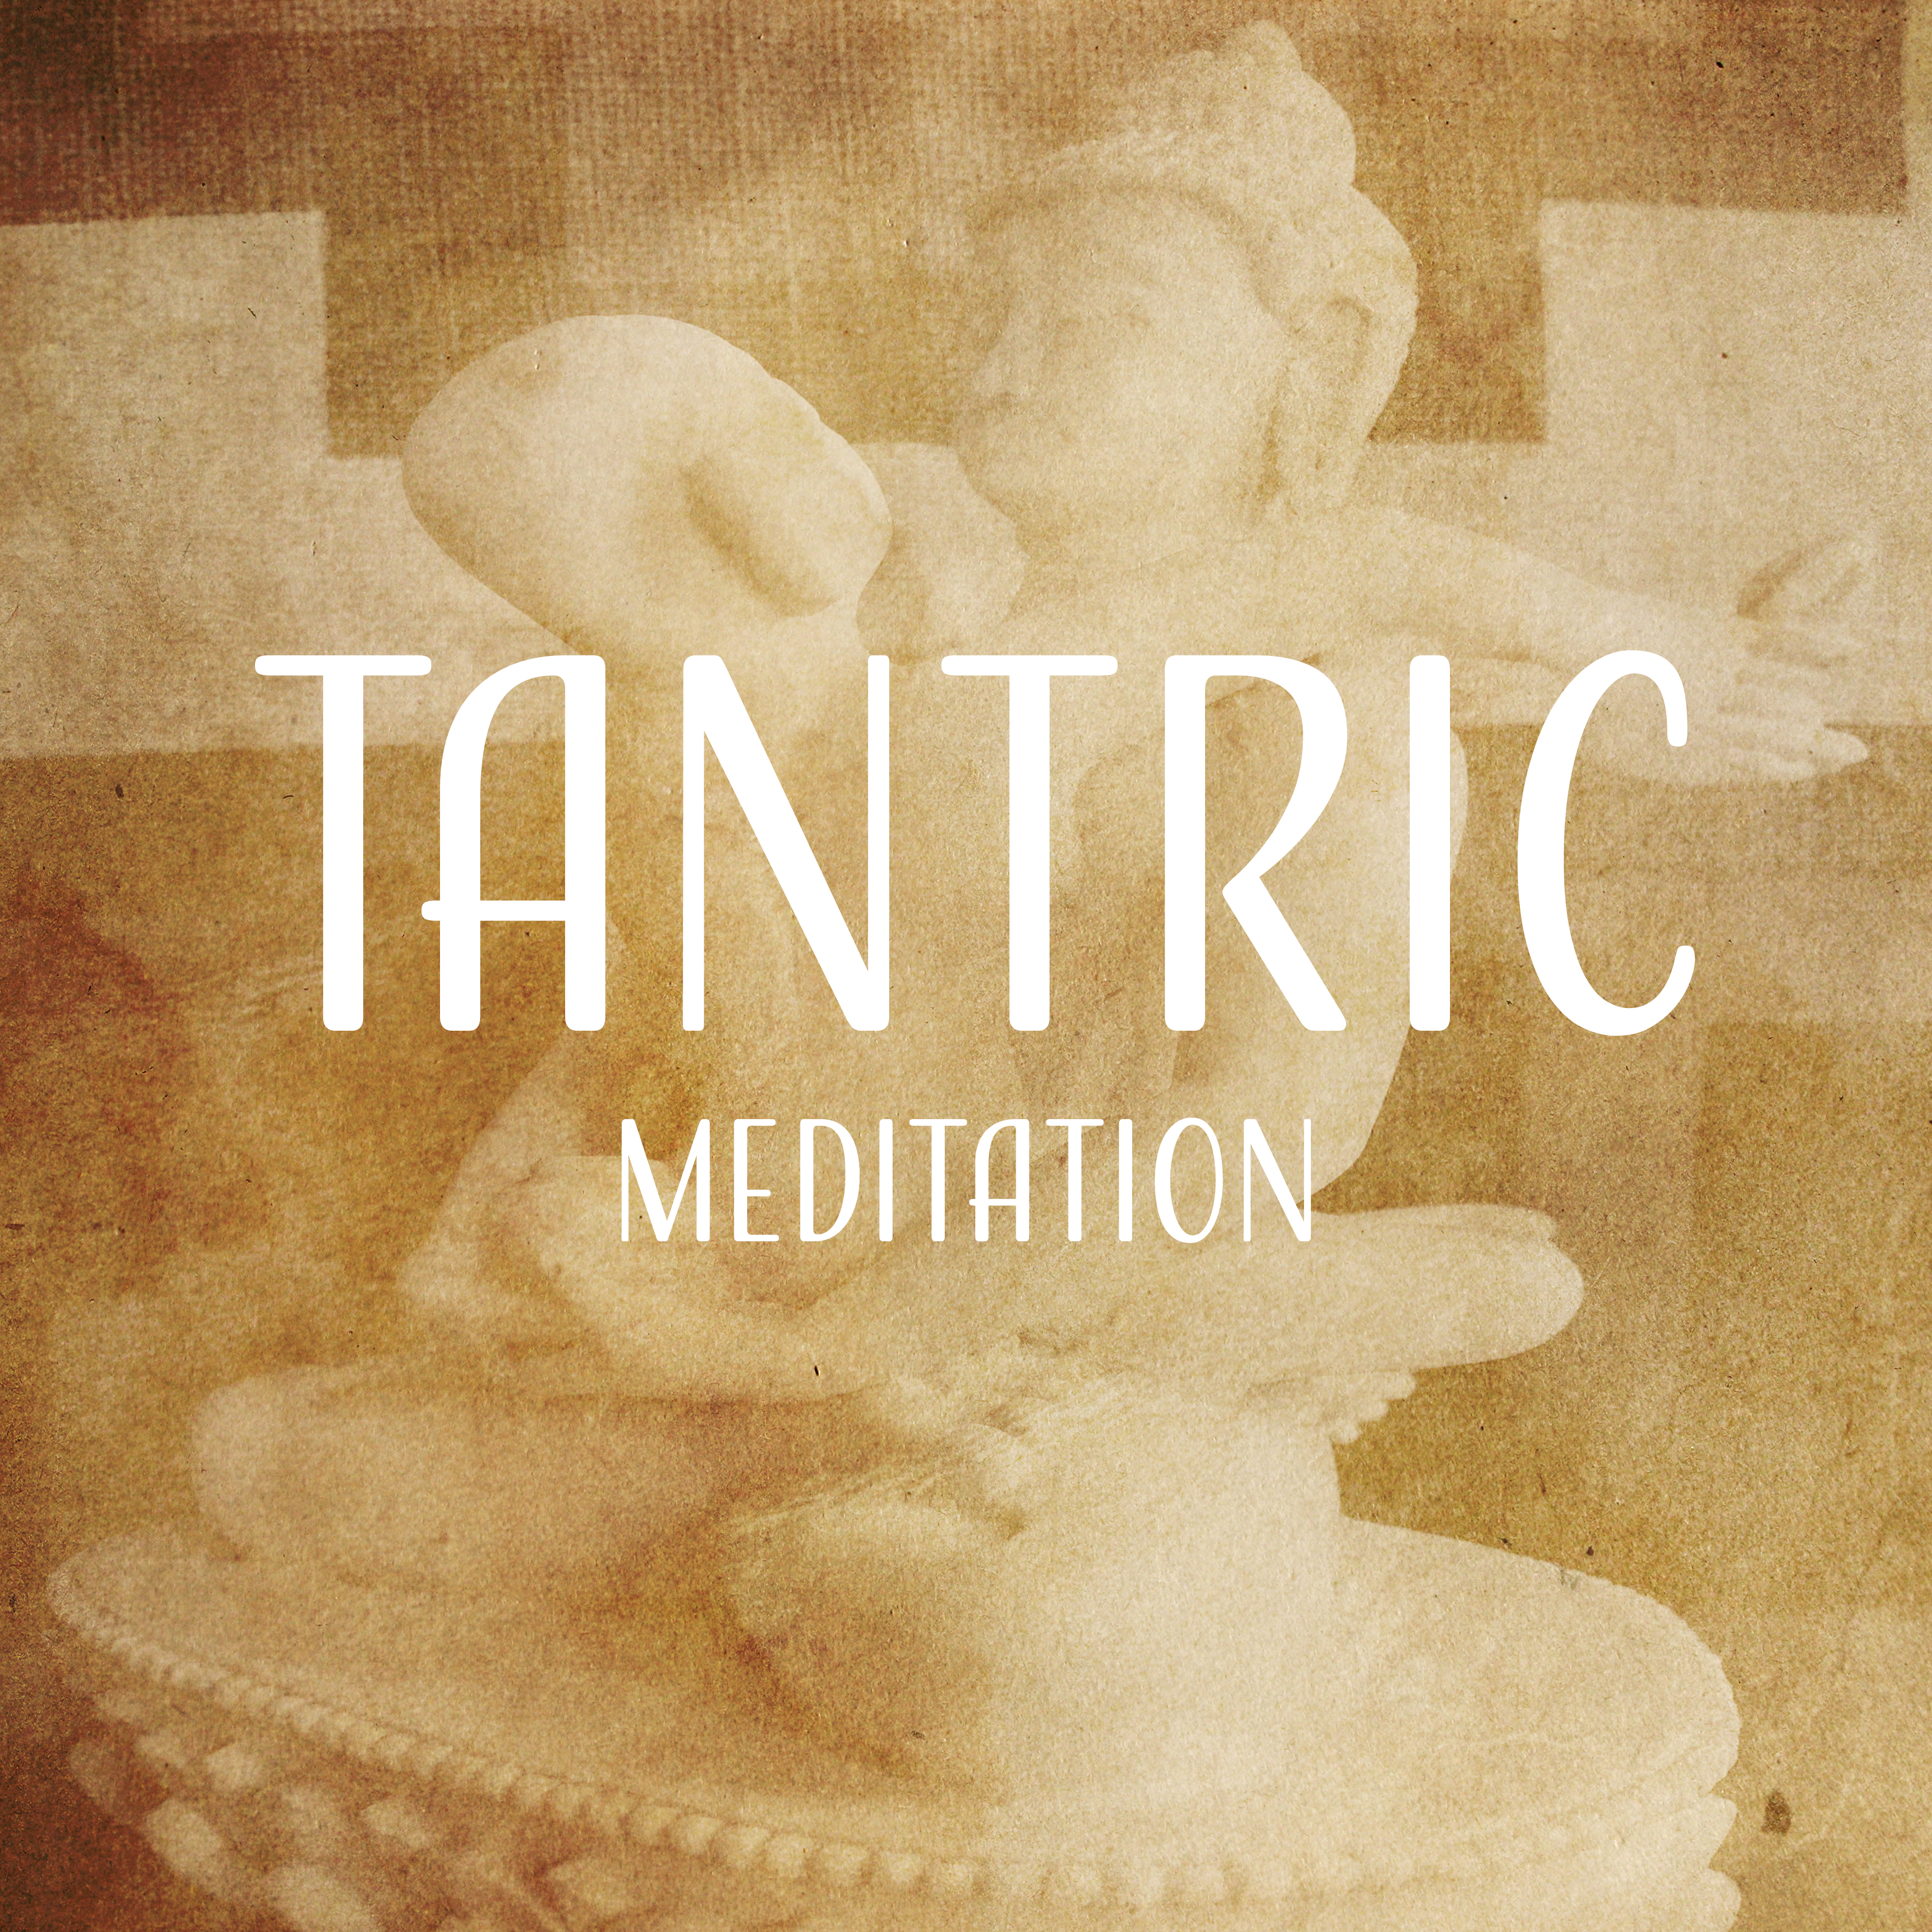 Tantric Meditation – ****** Meditation, Tantra Music, Relaxation, Sensual Sounds of New Age Music 2017